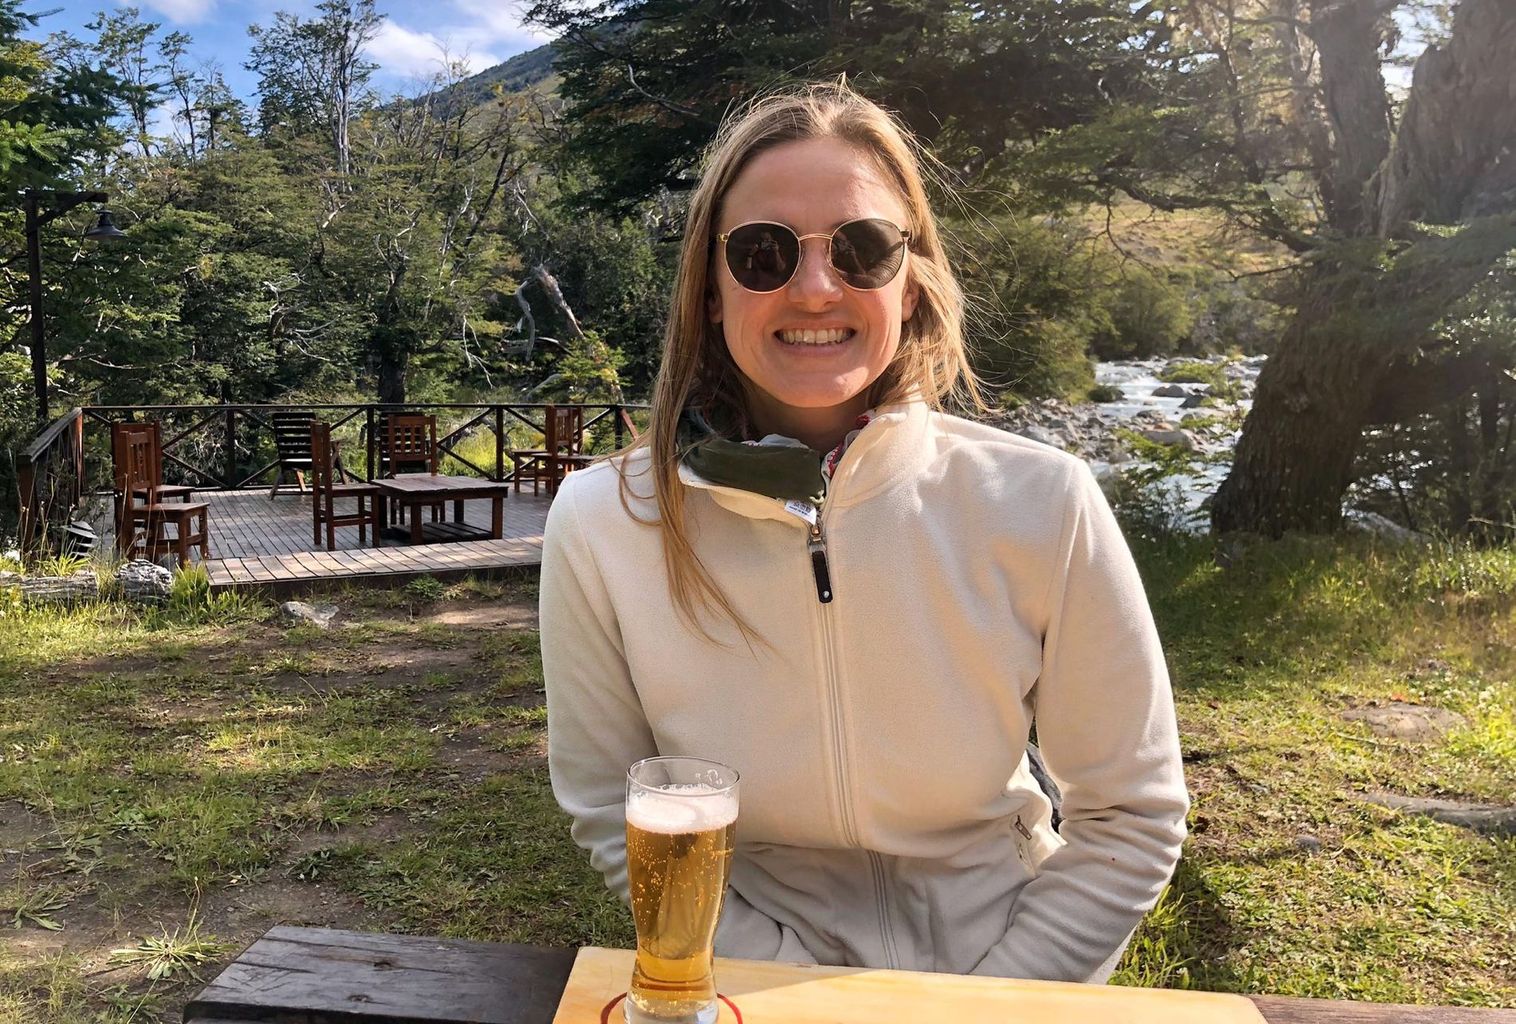 Dr Stella Bollmann lives in Zurich-Wiedikon, and has been working at the University of Teacher Education Lucerne since February 2020. Here exploring South America.